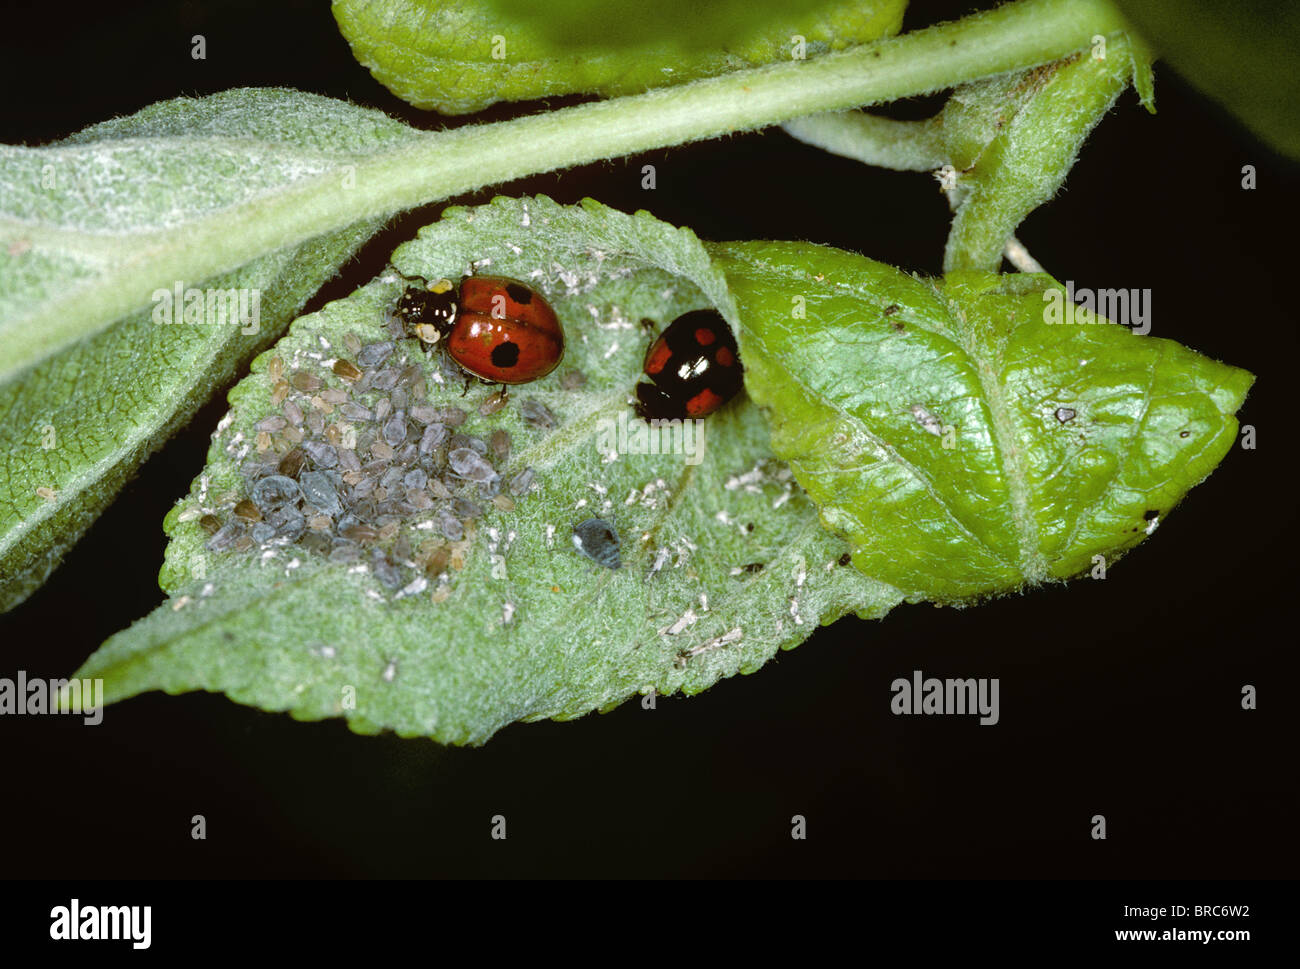 Two-spotted ladybirds (Adalia bipunctata) two colour variations feeding on rosy apple aphids (Dysaphis plantaginea) Stock Photo